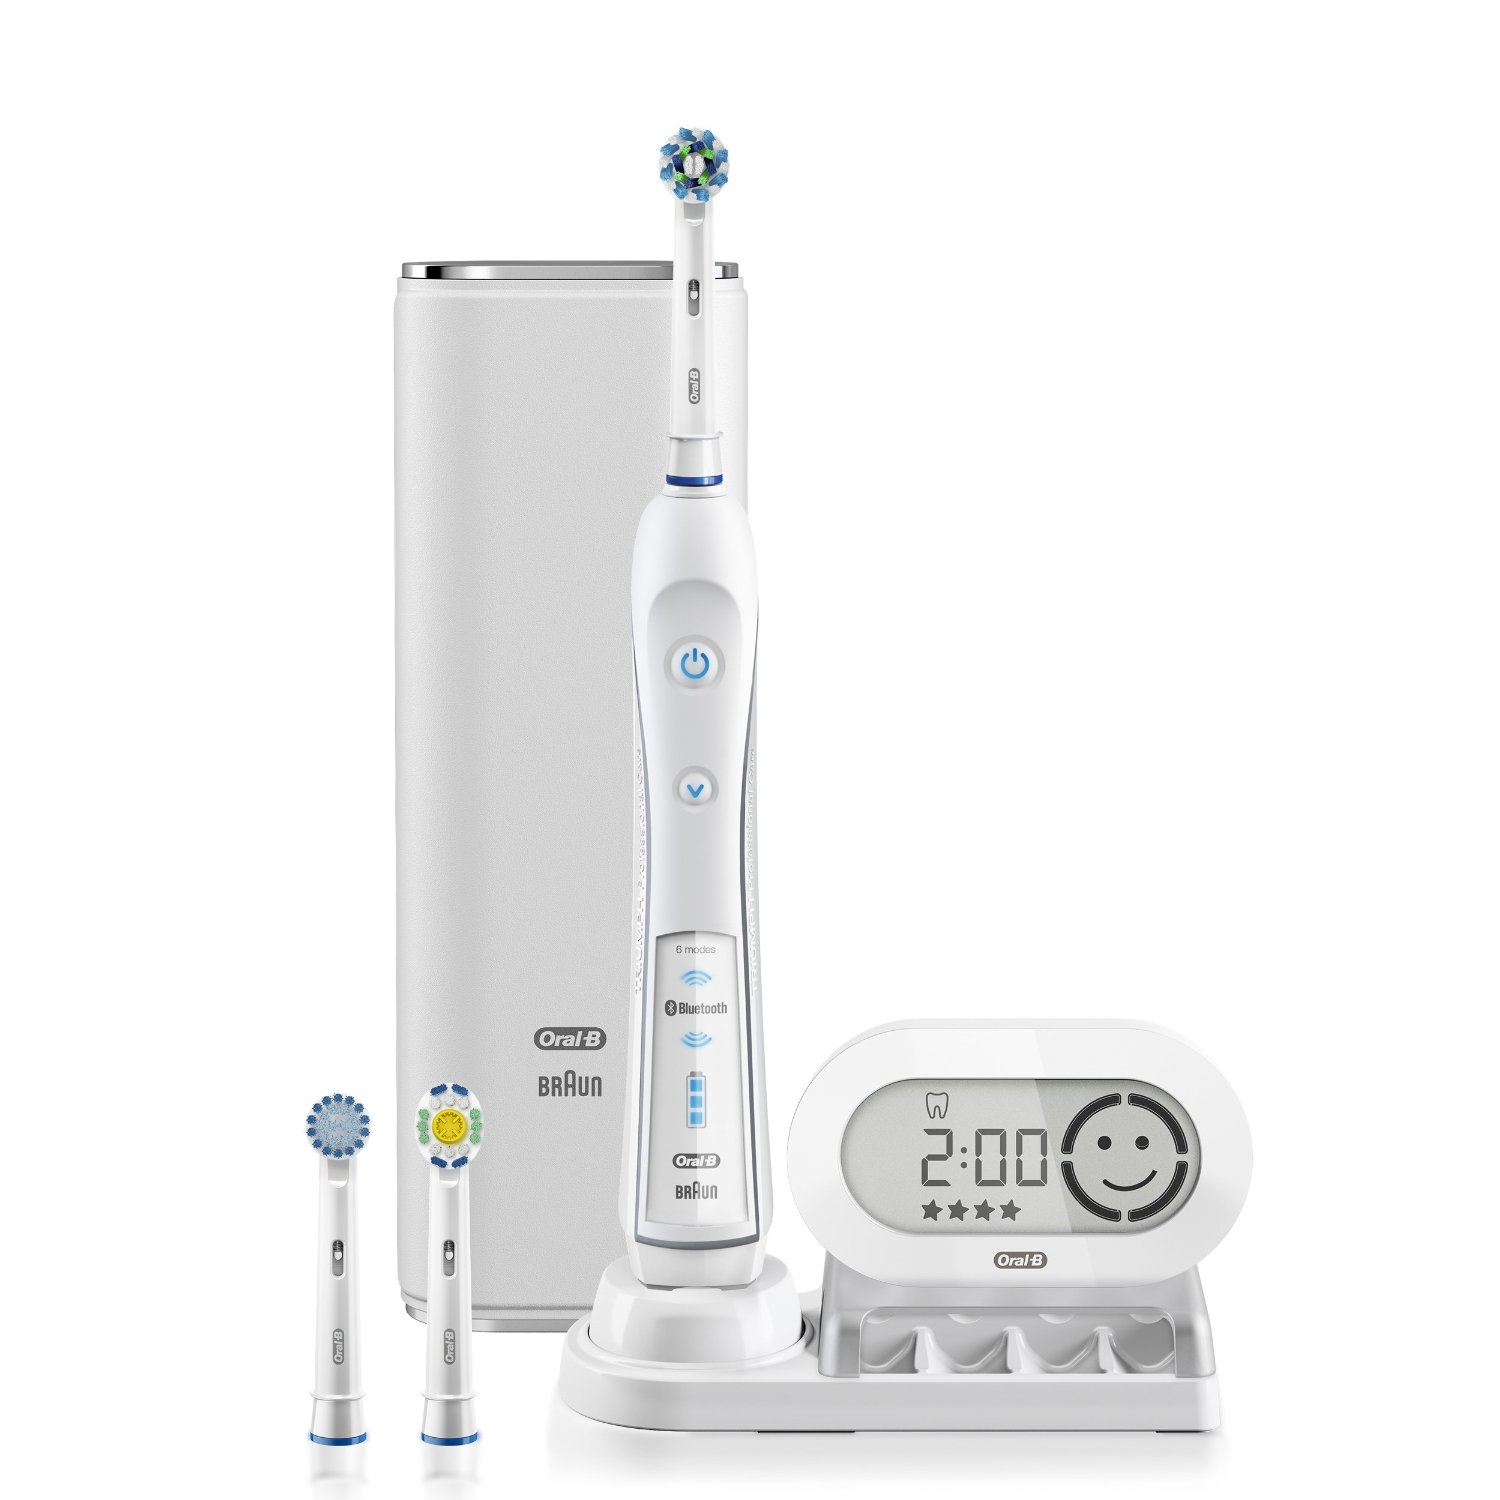 Top 10 Best Electric Toothbrushes - Reviews of Electric Toothbrushes